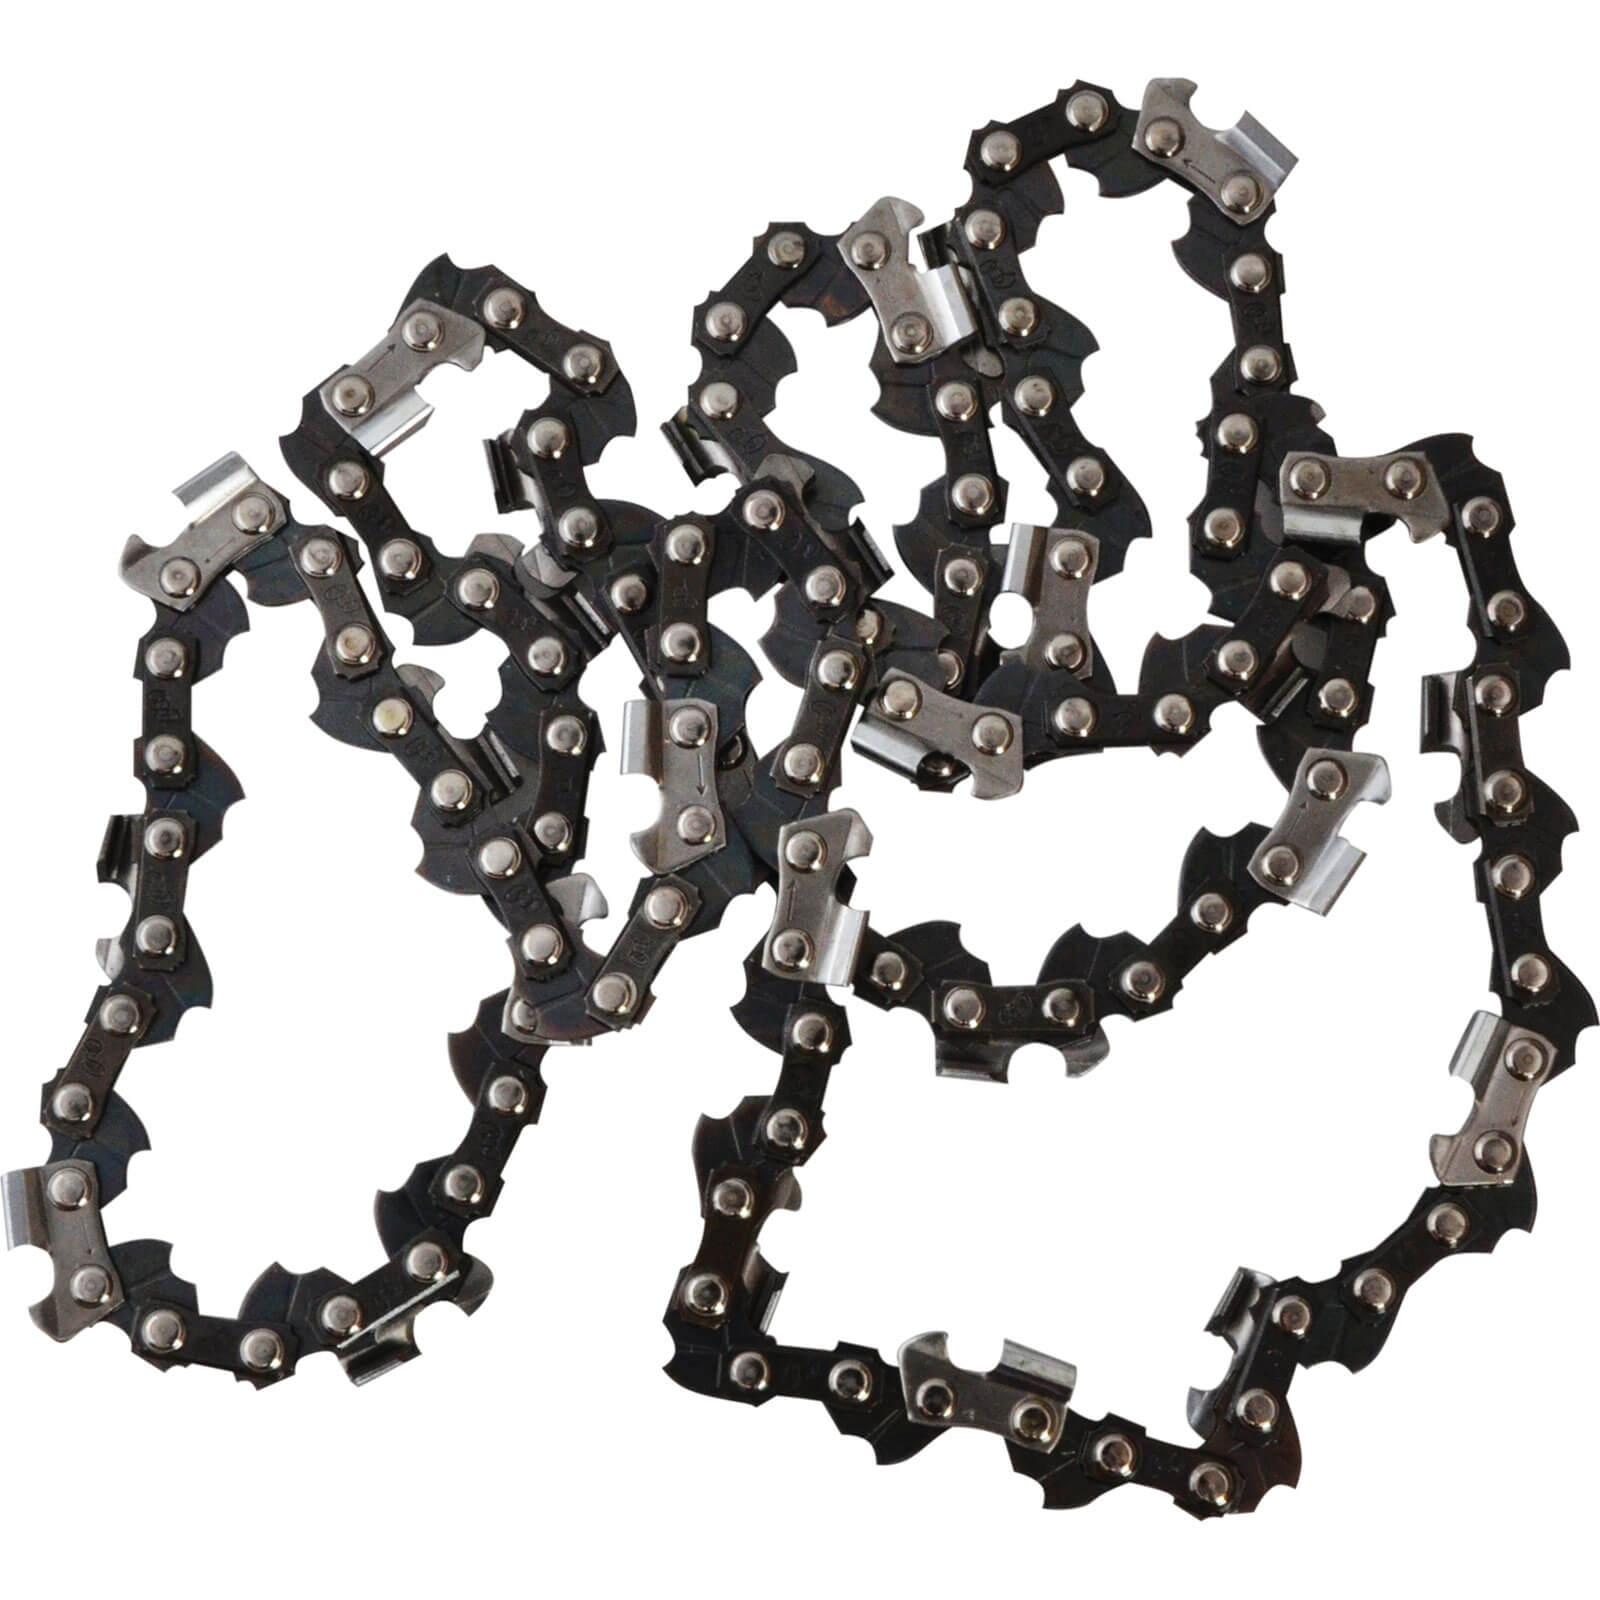 Image of ALM Chainsaw Chain 3/8" x 61 Links for 450mm Bar on the Aldi Gardenline GLPCS/10 450mm